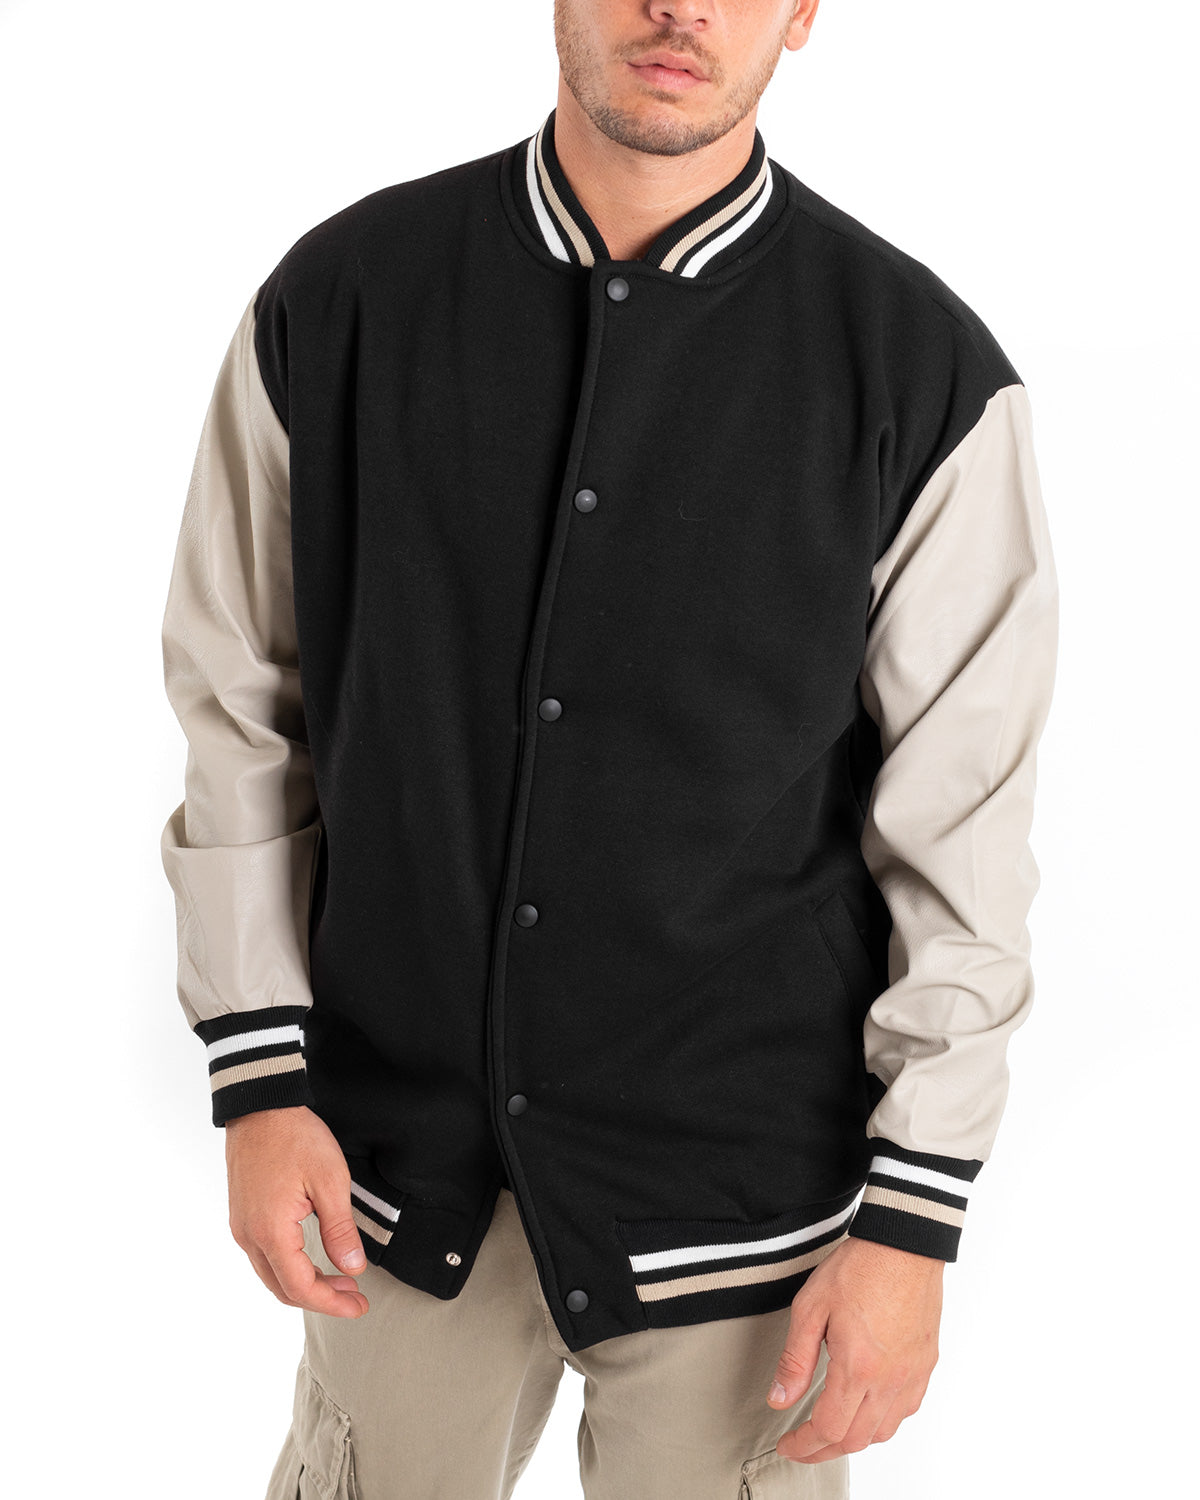 Men's College Varsity Jacket with Faux Leather Sleeves Two-Tone Black Beige GIOSAL